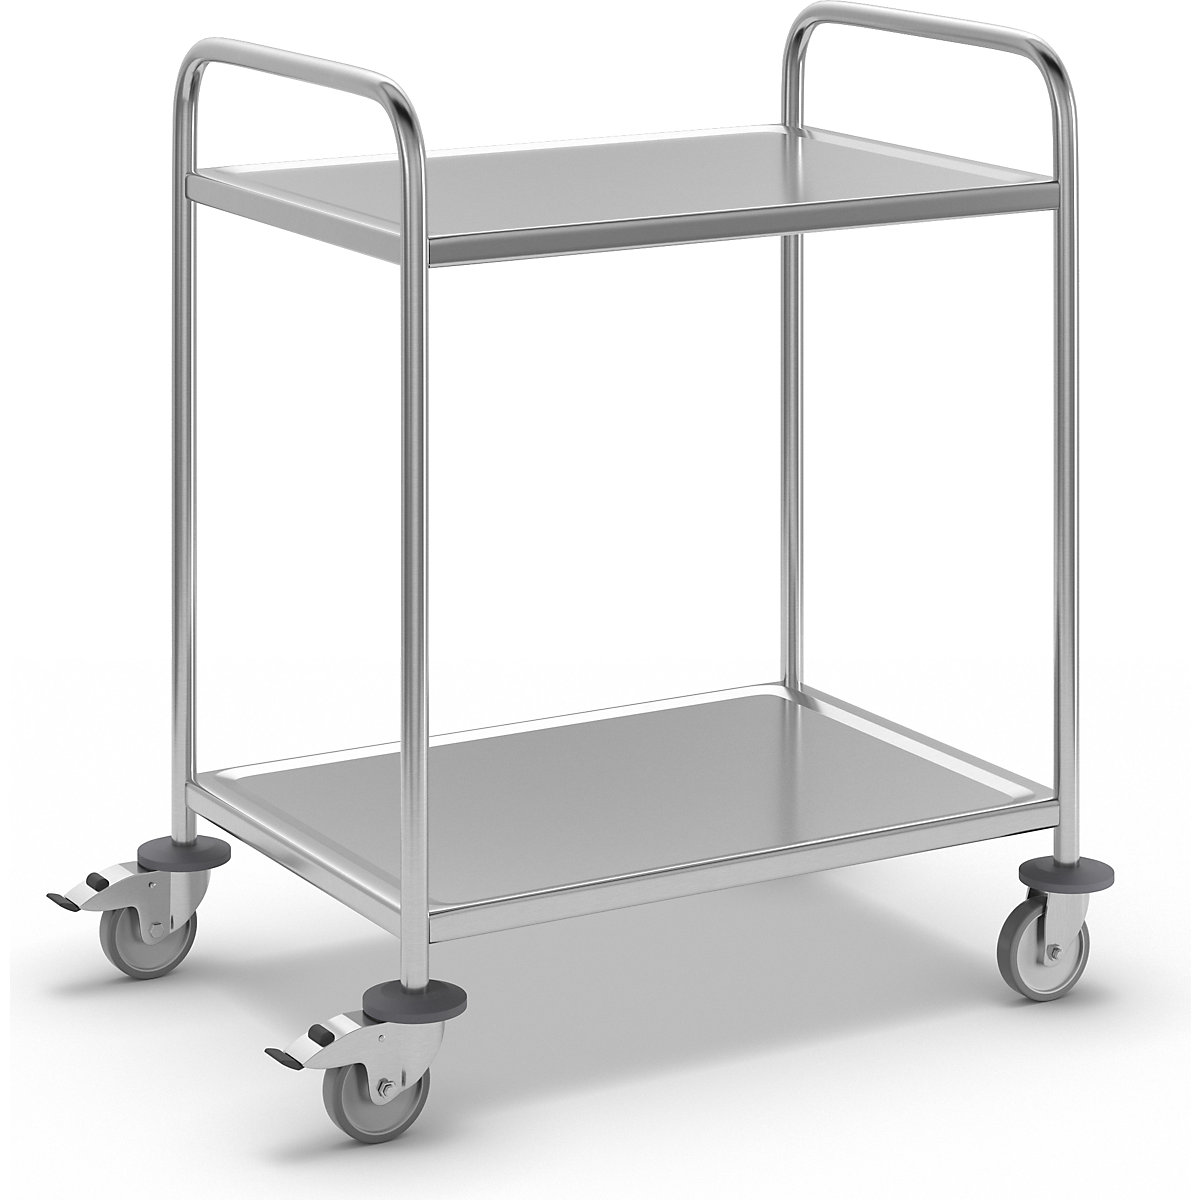 Stainless steel serving trolley – Kongamek, LxWxH 910 x 590 x 940 mm, with 2 shelves-2